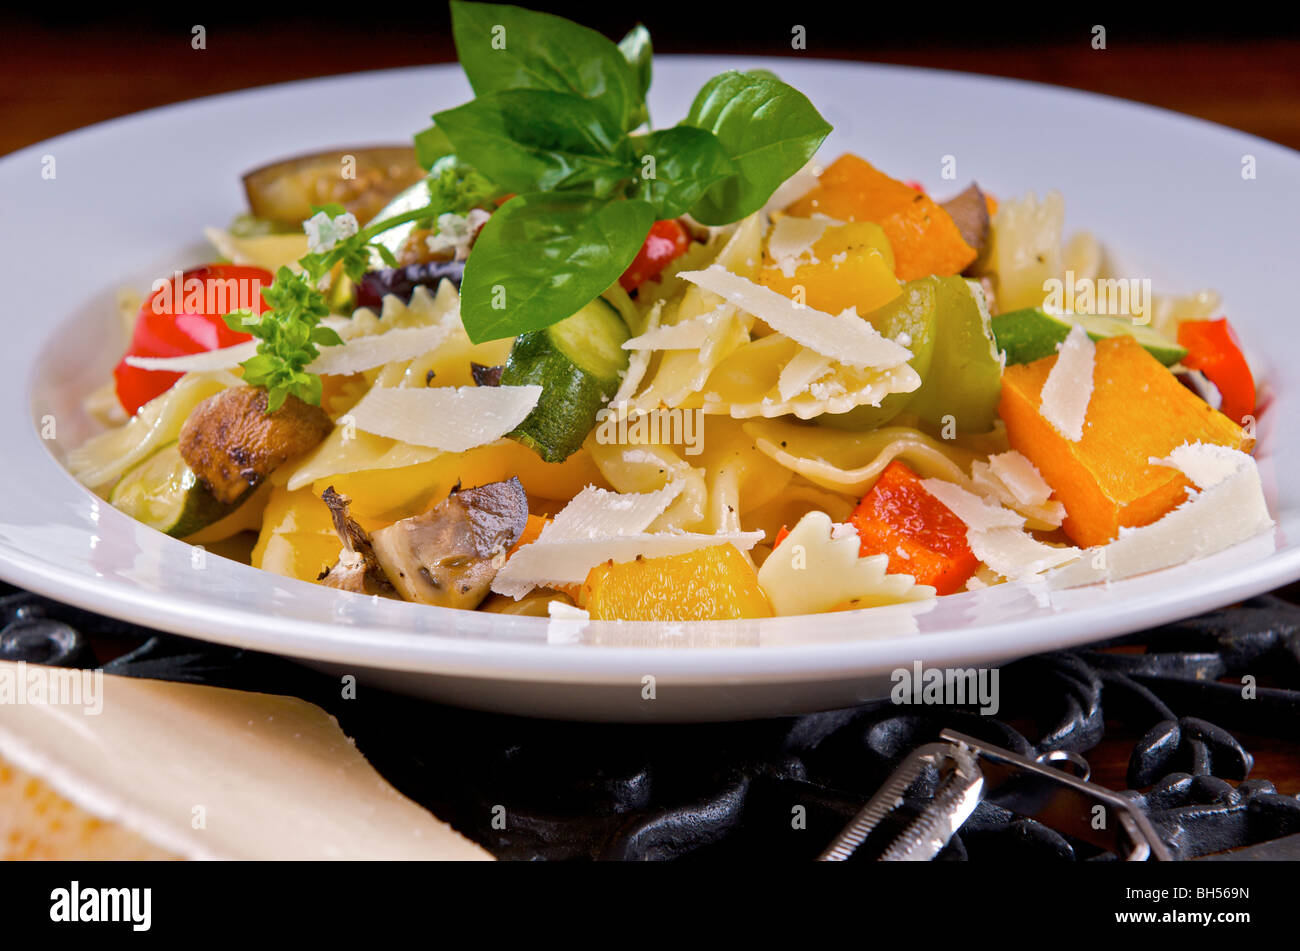 Pasta and roasted vegetable dish plated on white plate Stock Photo